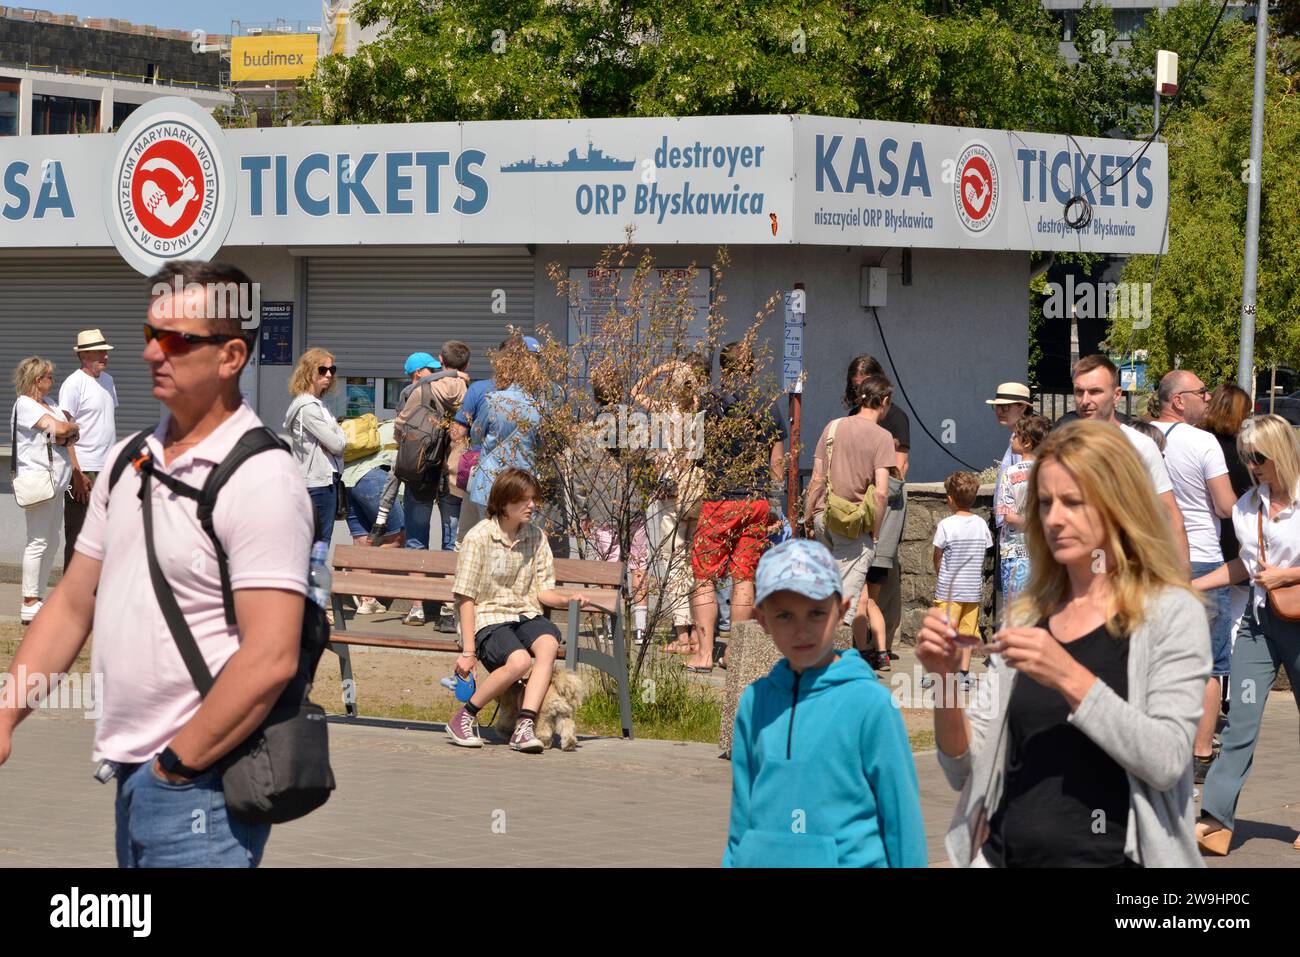 Tourists at the tickets sale point for visiting the ORP Blyskawica museum ship in Gdynia, Poland, Europe, EU Stock Photo